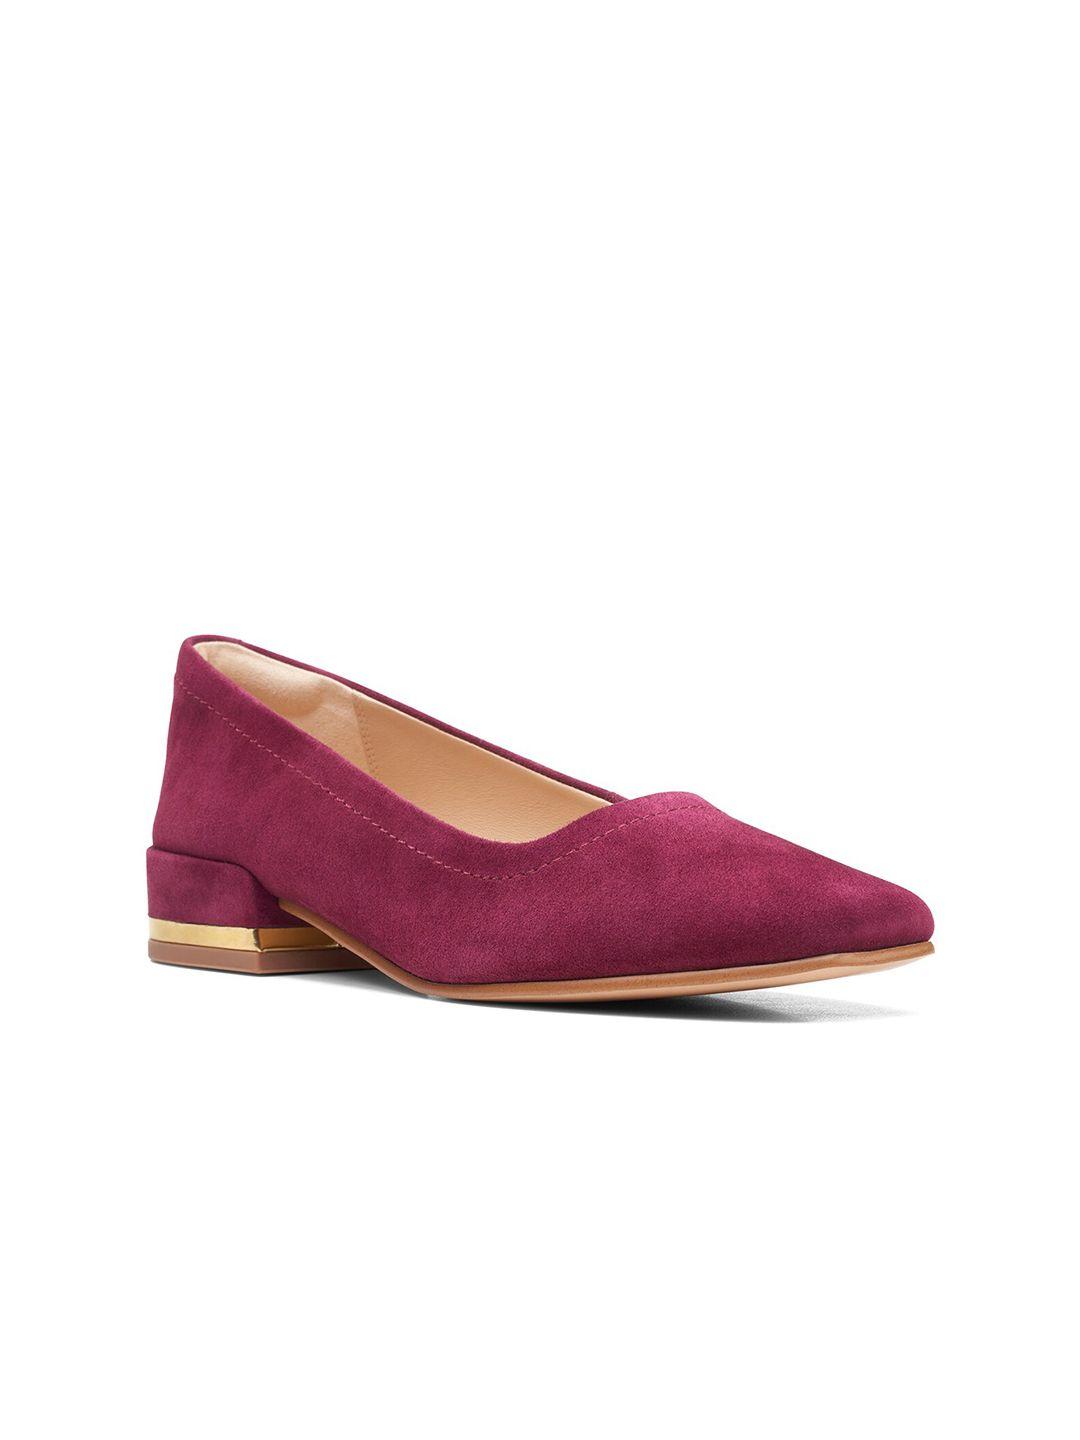 clarks-red-leather-block-pumps